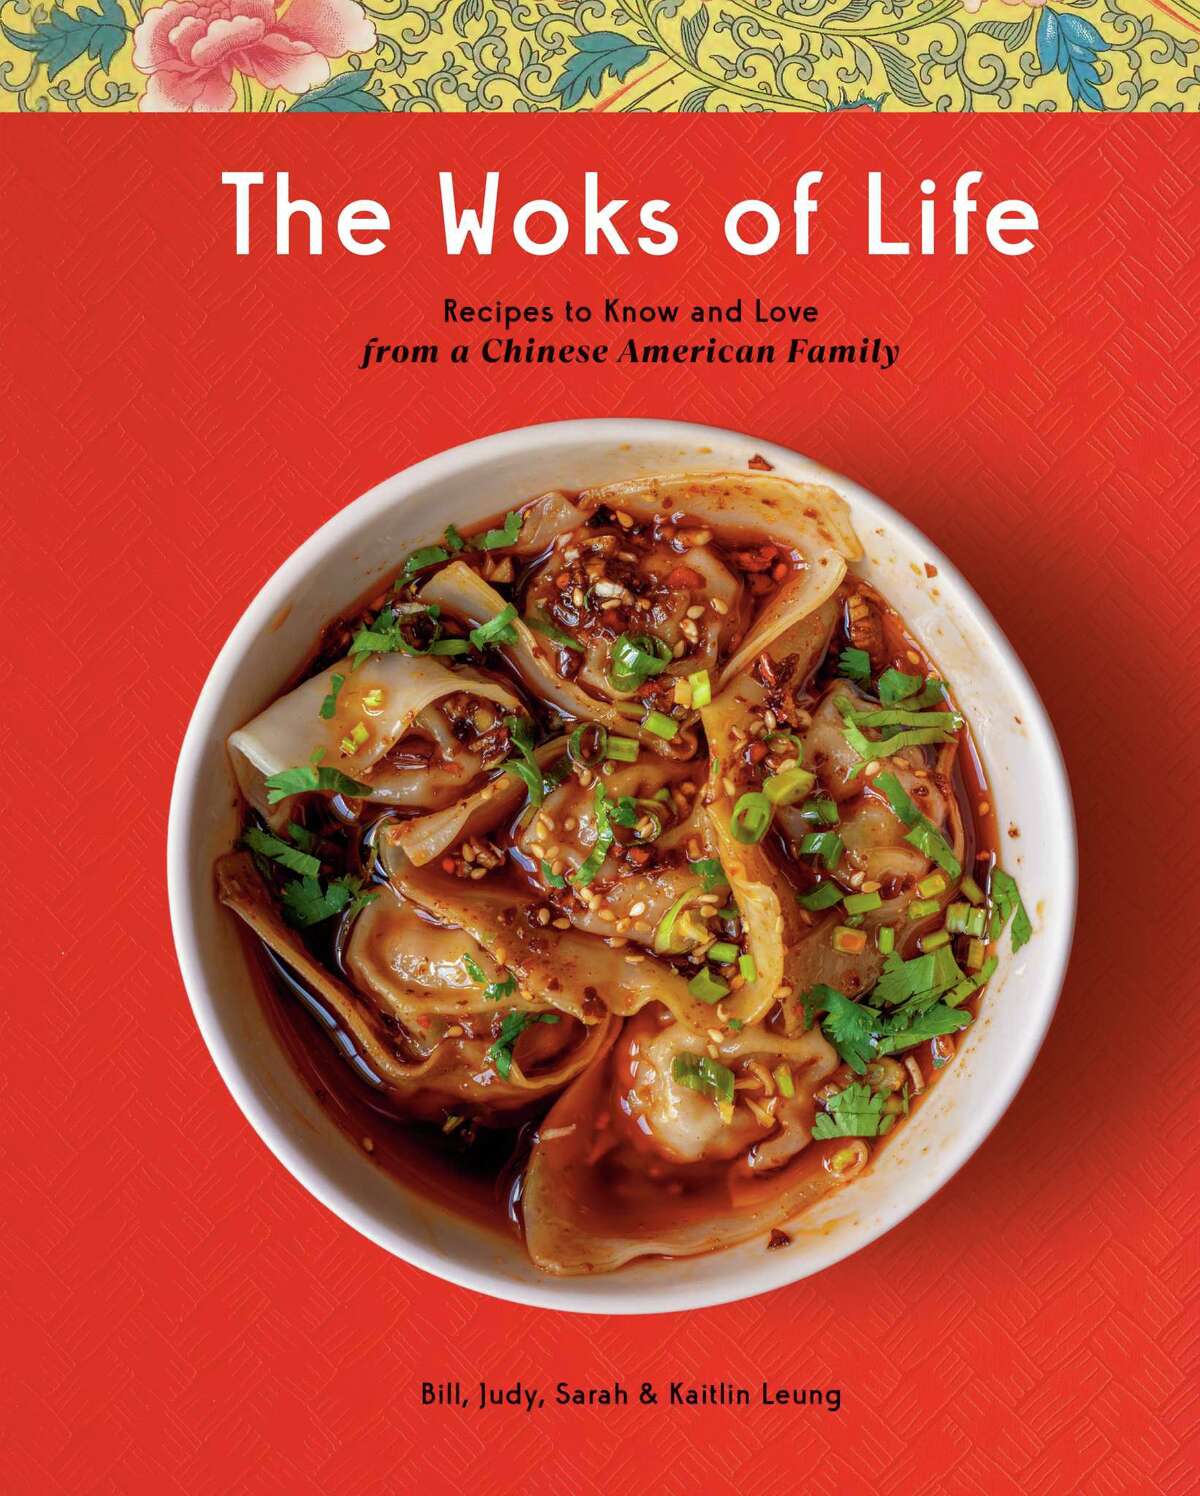 Reprinted with permission from The Woks of Life by Bill Leung, Kaitlin Leung, Judy Leung, and Sarah Leung, copyright © 2022. Photographs by Sarah Leung and Kaitlin Leung. Published by Clarkson Potter, a division of Penguin Random House, LLC.